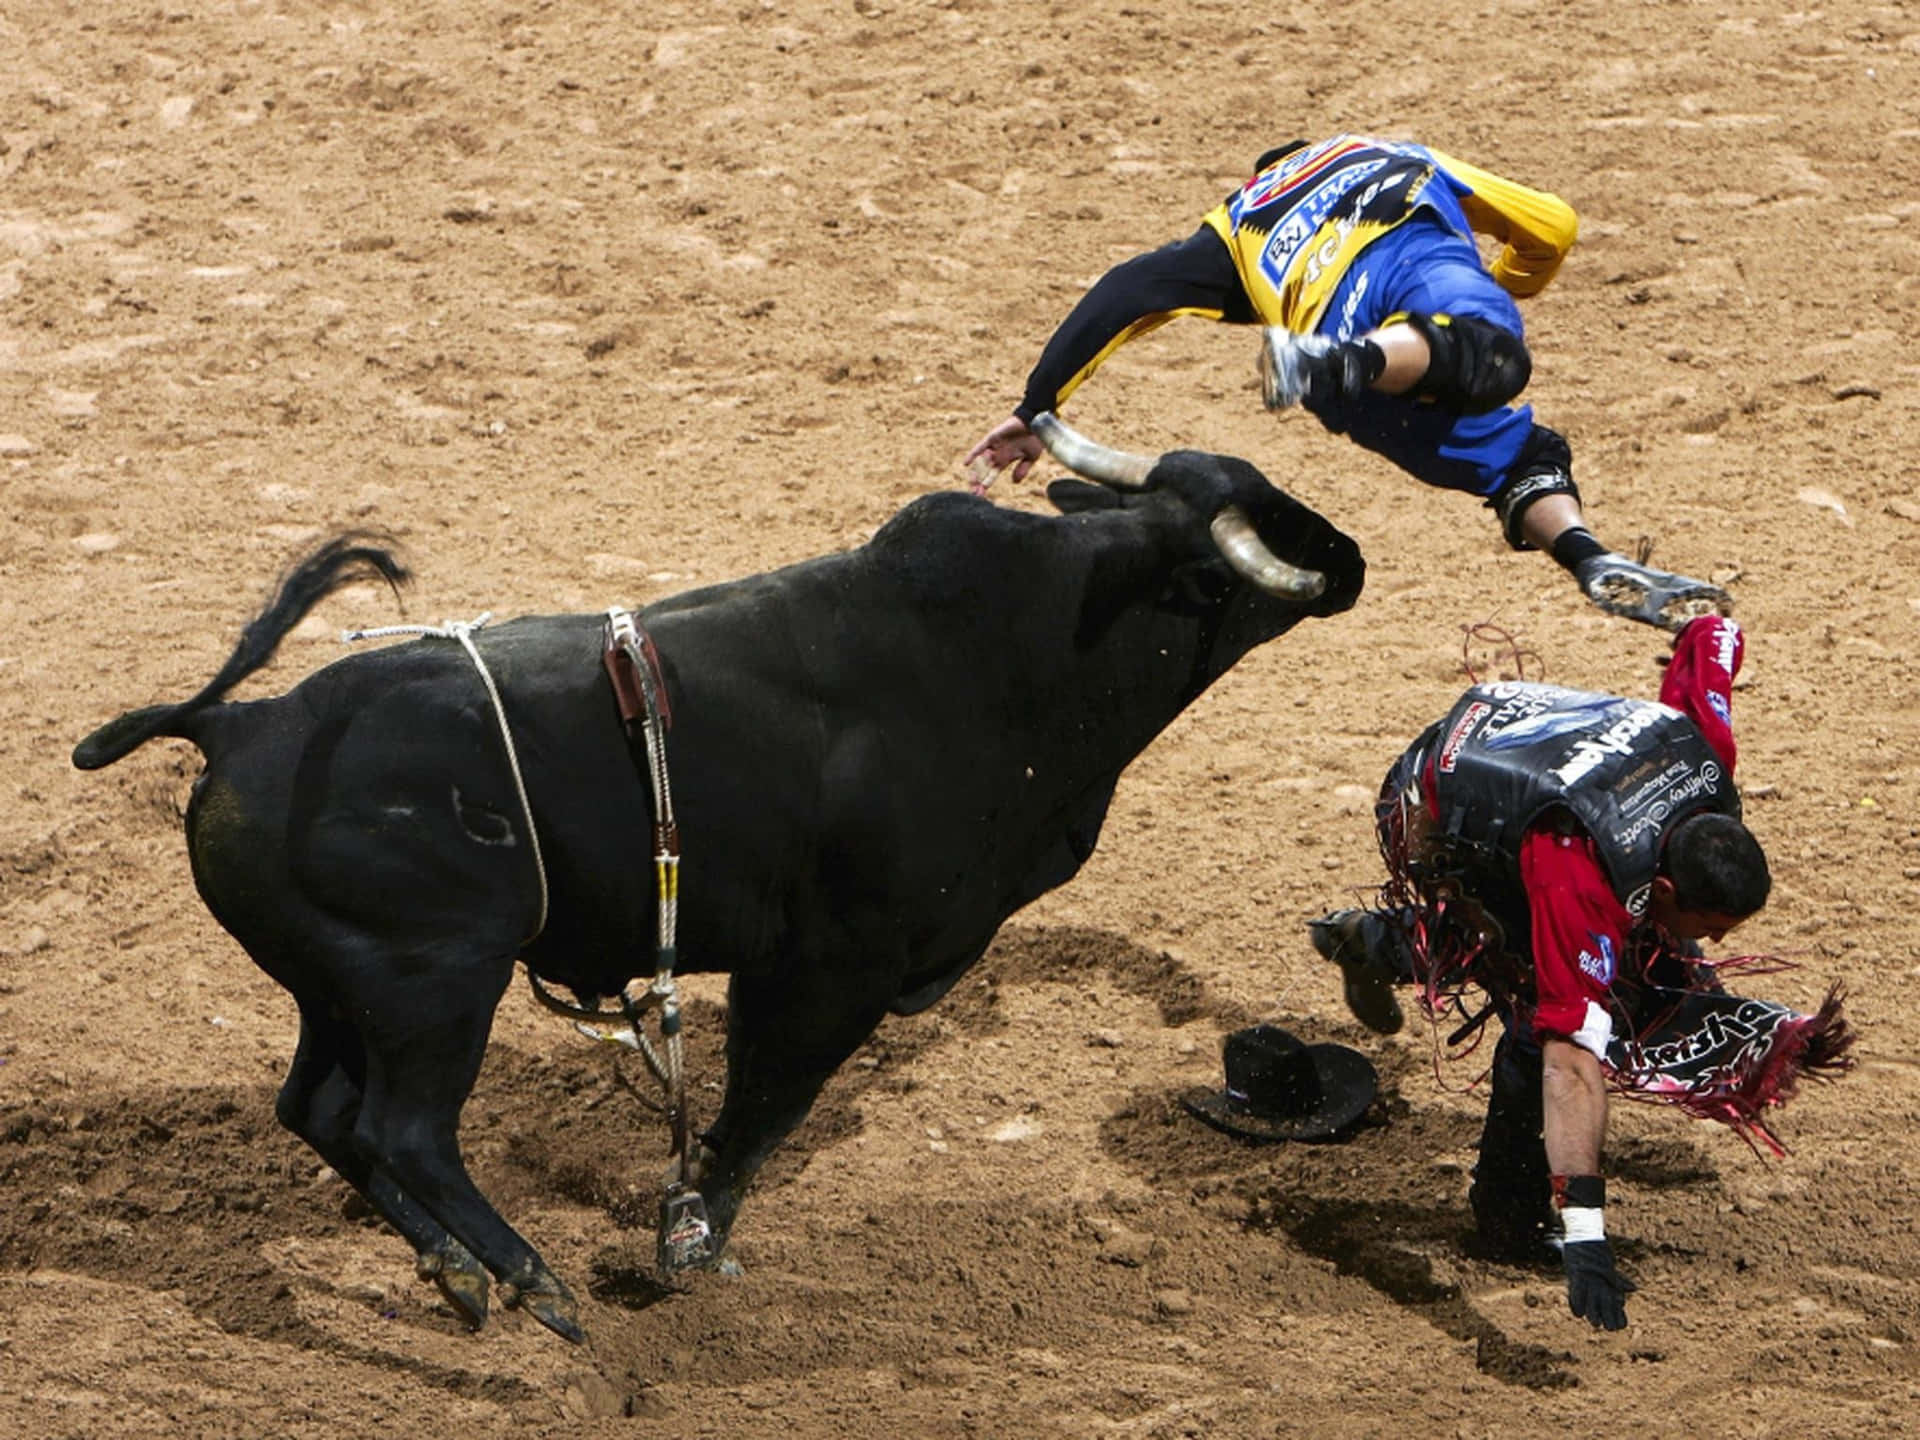 A Man Doing What He Loves: Bull Riding